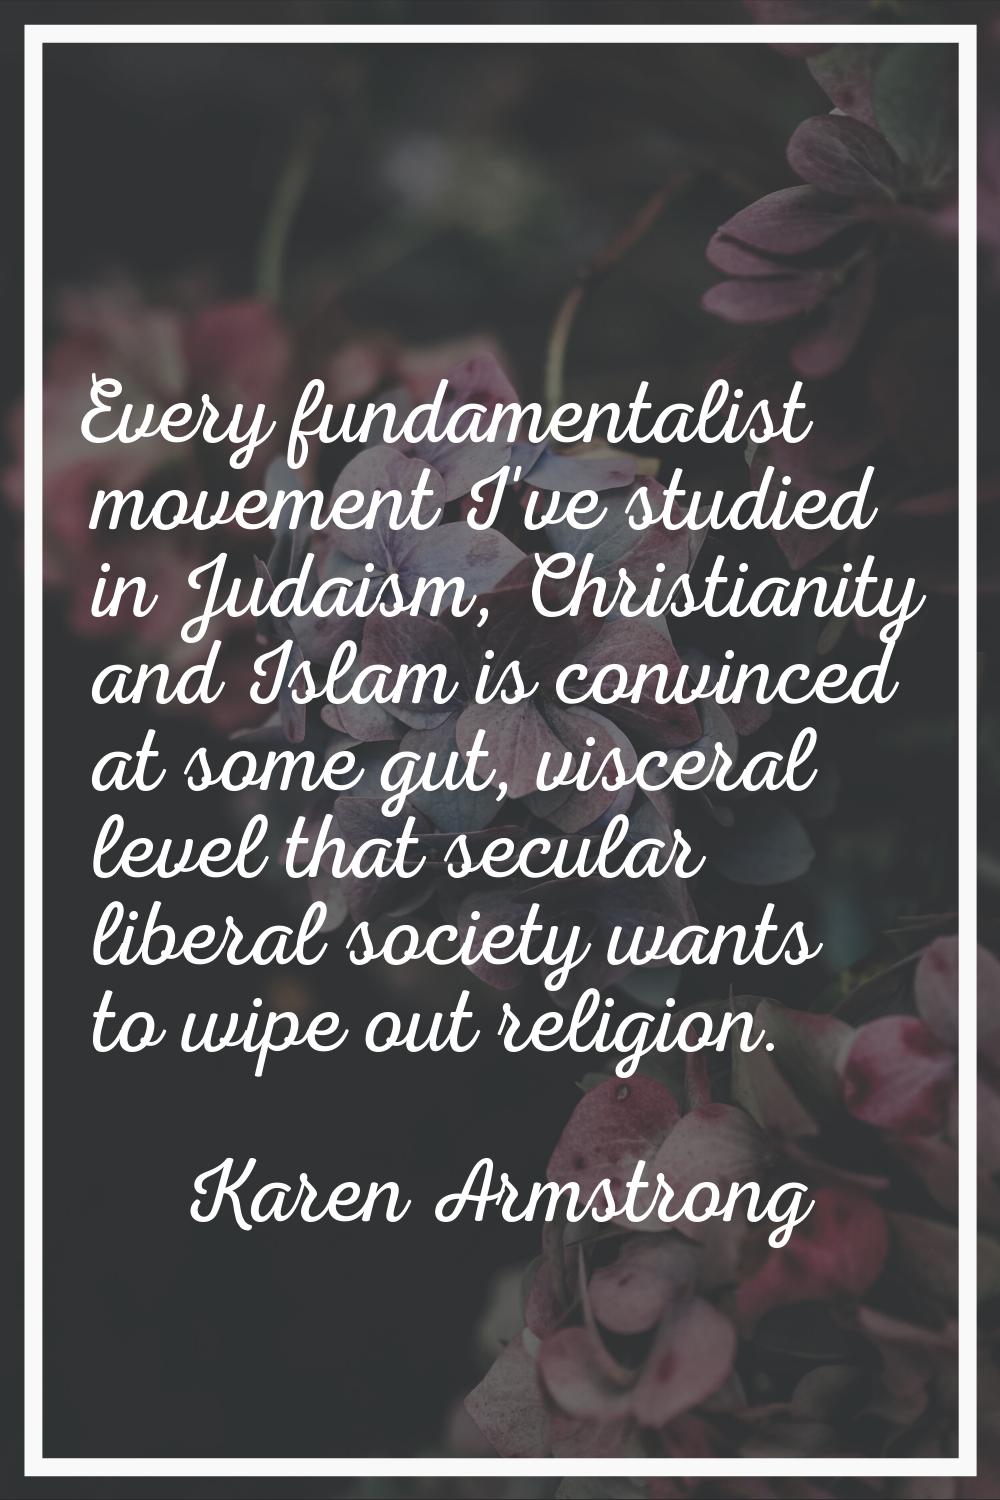 Every fundamentalist movement I've studied in Judaism, Christianity and Islam is convinced at some 